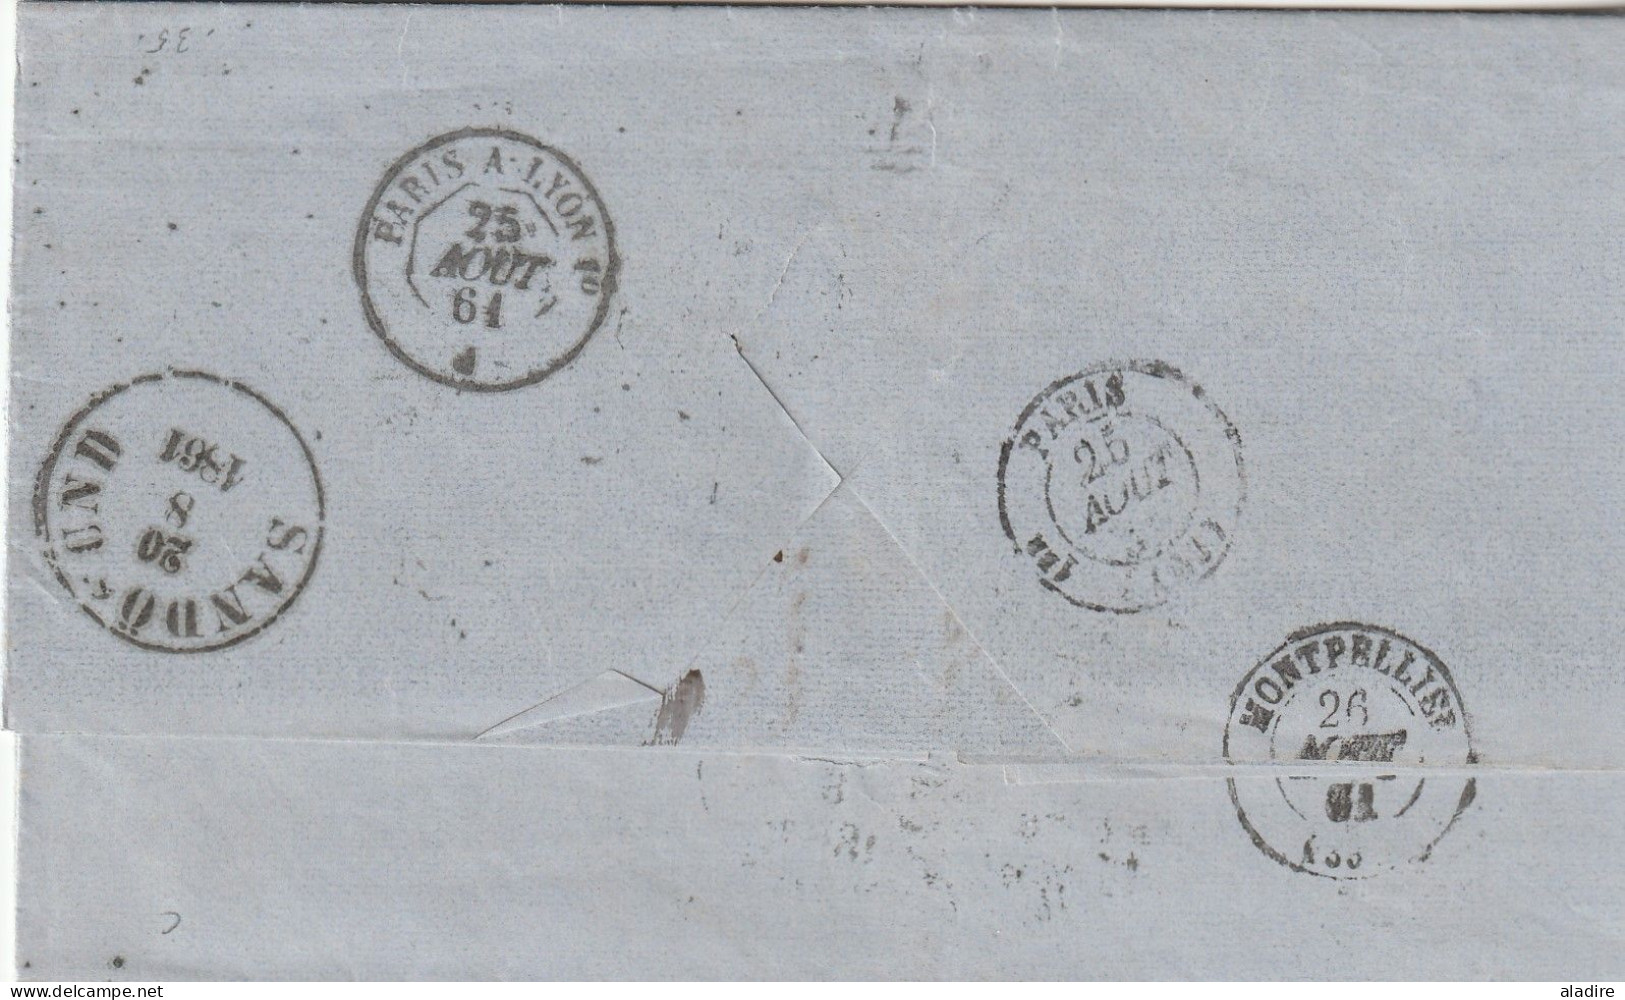 NORGE - NORWAY - NORVEGE - Collection Of 5 Old Letters & Covers (1830 -1966) - 10 Scans - € 49 Euros - Sammlungen